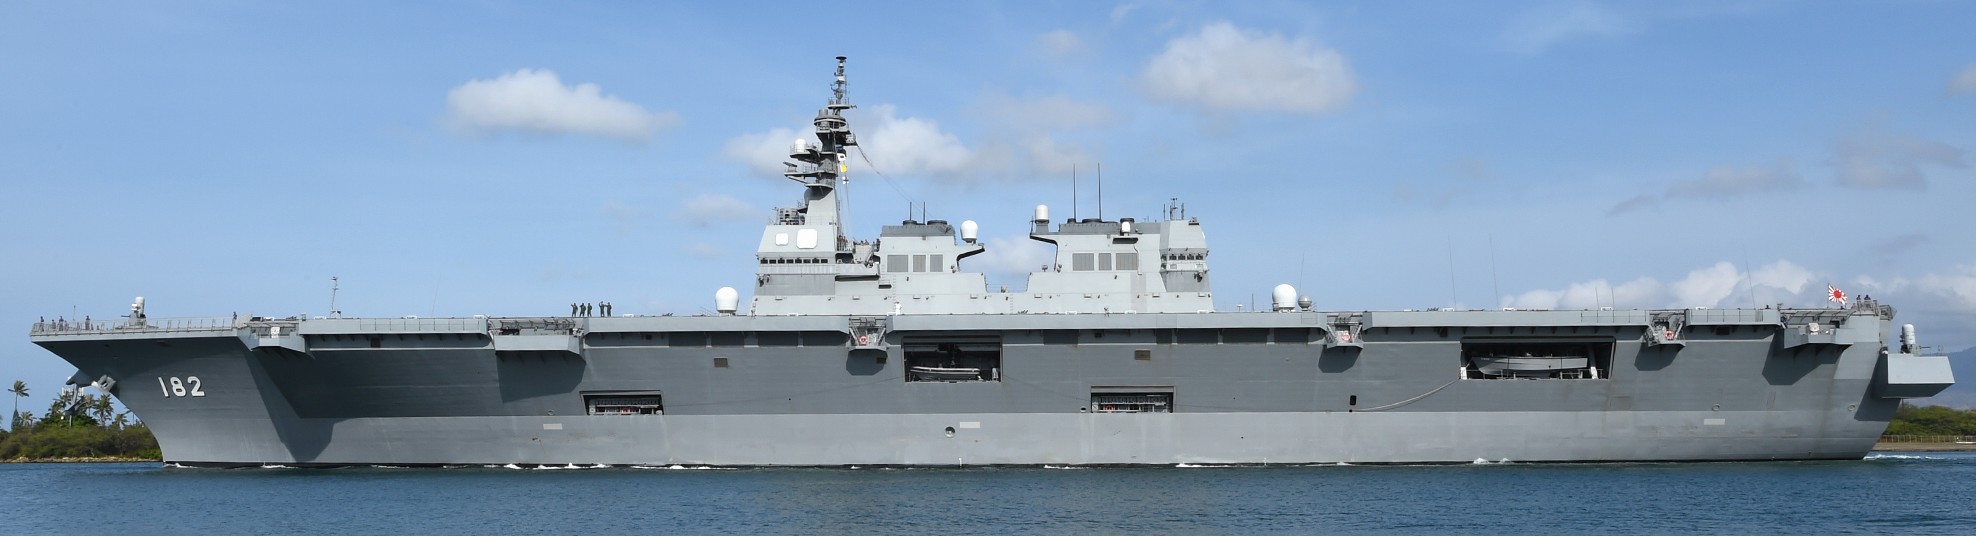 ddh-182 jds ise hyuga class helicopter destroyer japan maritime self defense force jmsdf 53